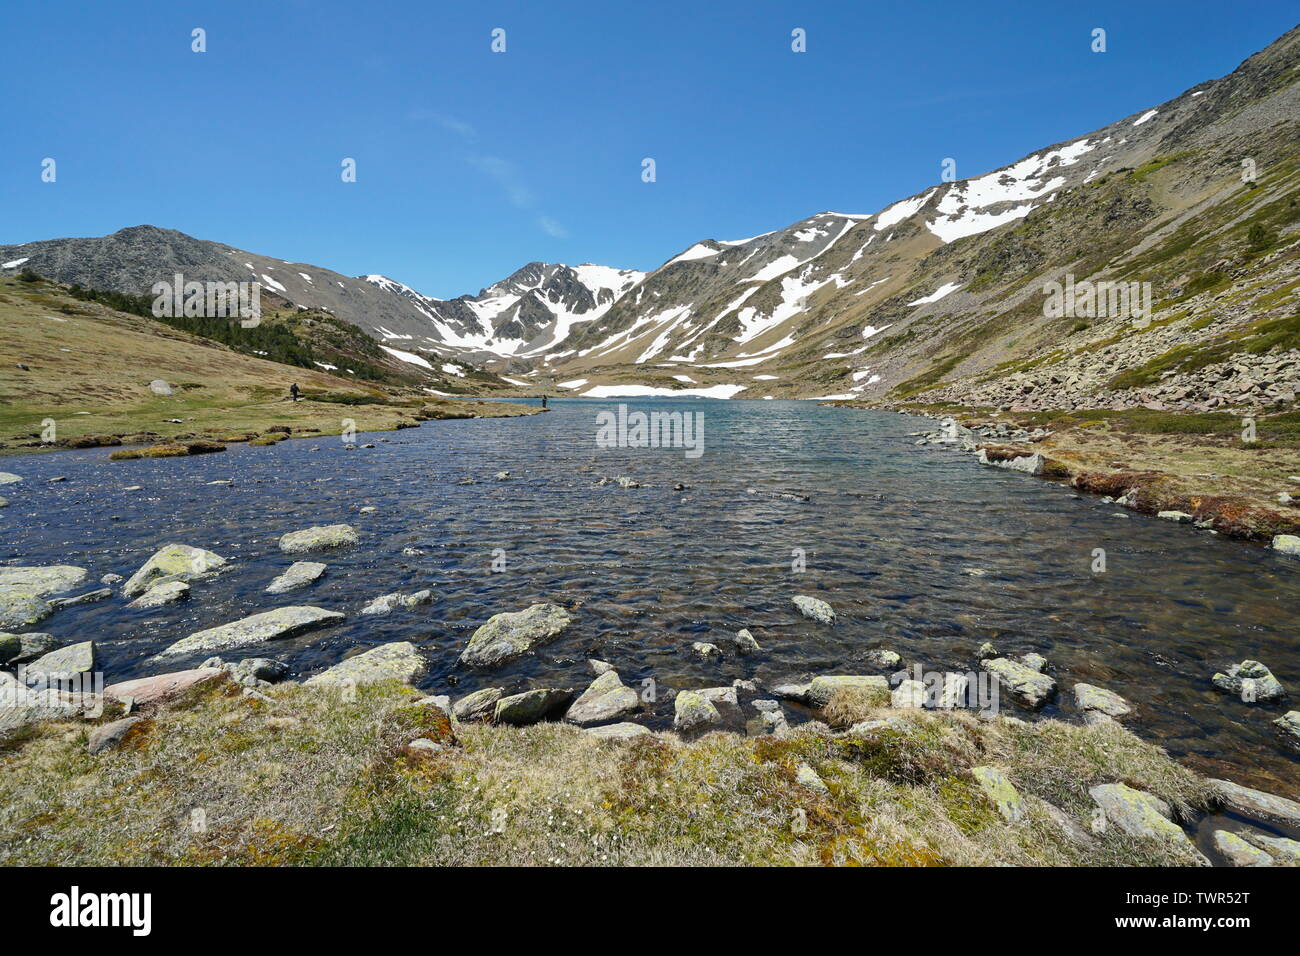 France mountain landscape Pyrenees, Trebens lake and Carlit massif, Pyrenees-Orientales Stock Photo